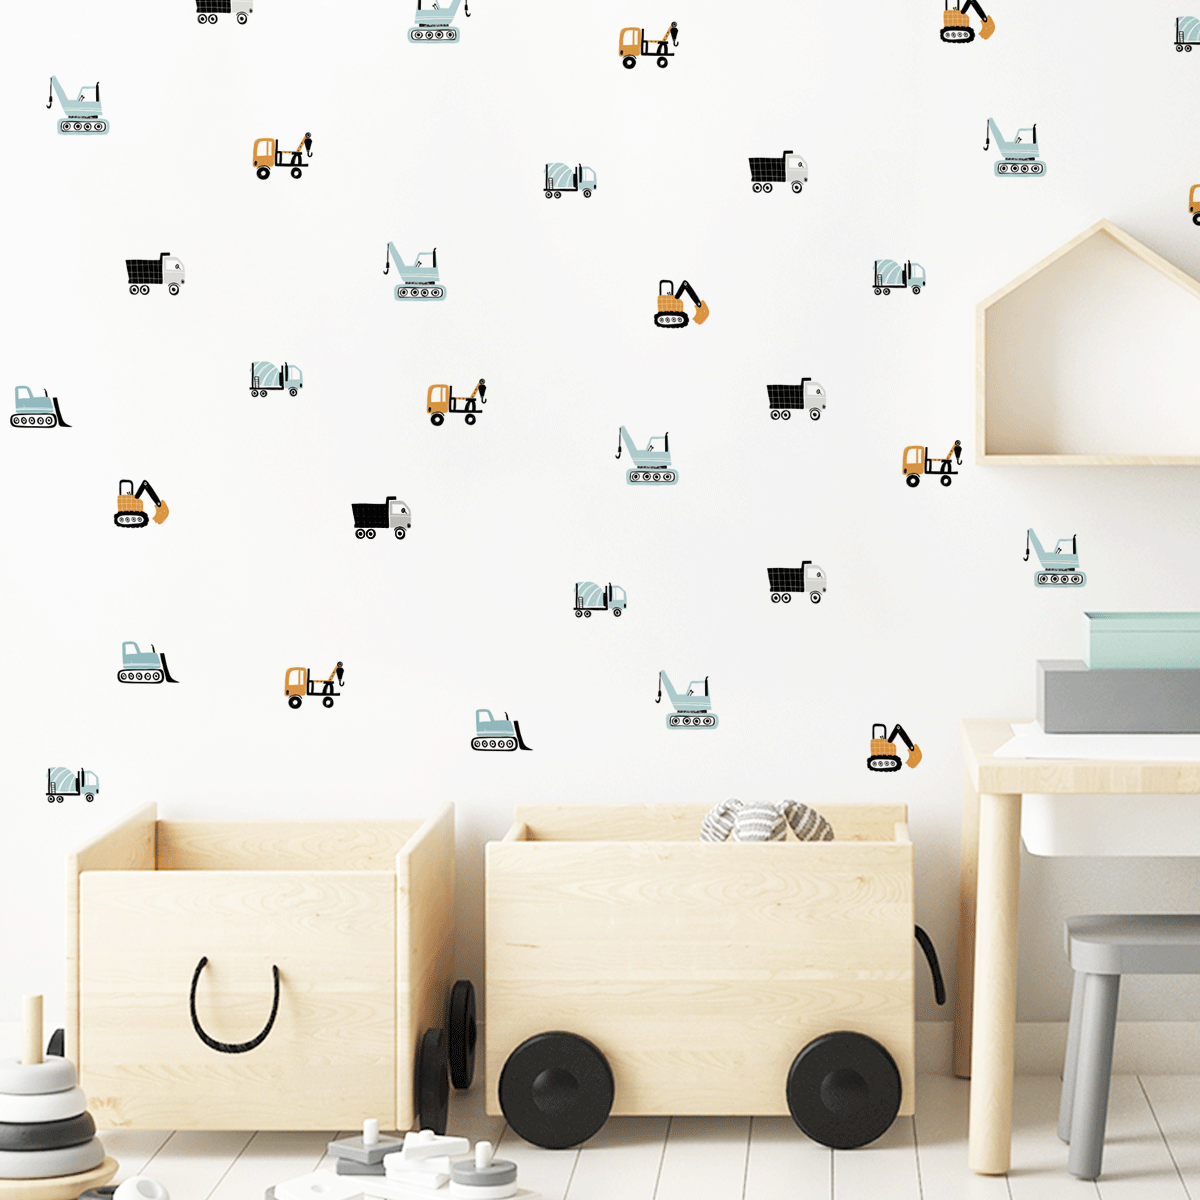 cars wall sticker, construction wall stickers, trucks wall stickers, nursery wall decals, nursery wall stickers, boys wall stickers